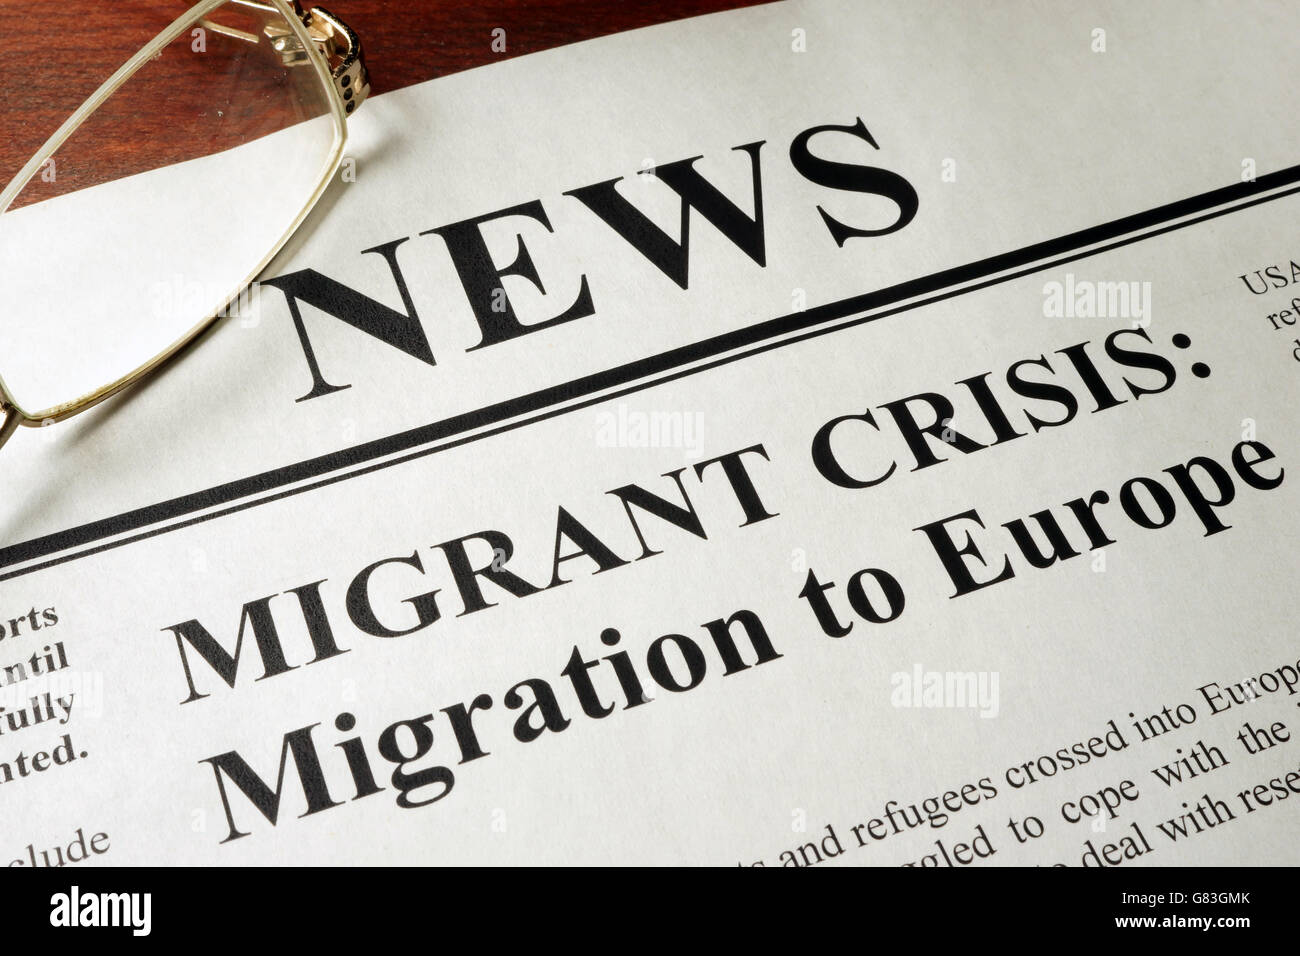 Newspaper with header news and Migrant crisis: Migration to Europe. Stock Photo